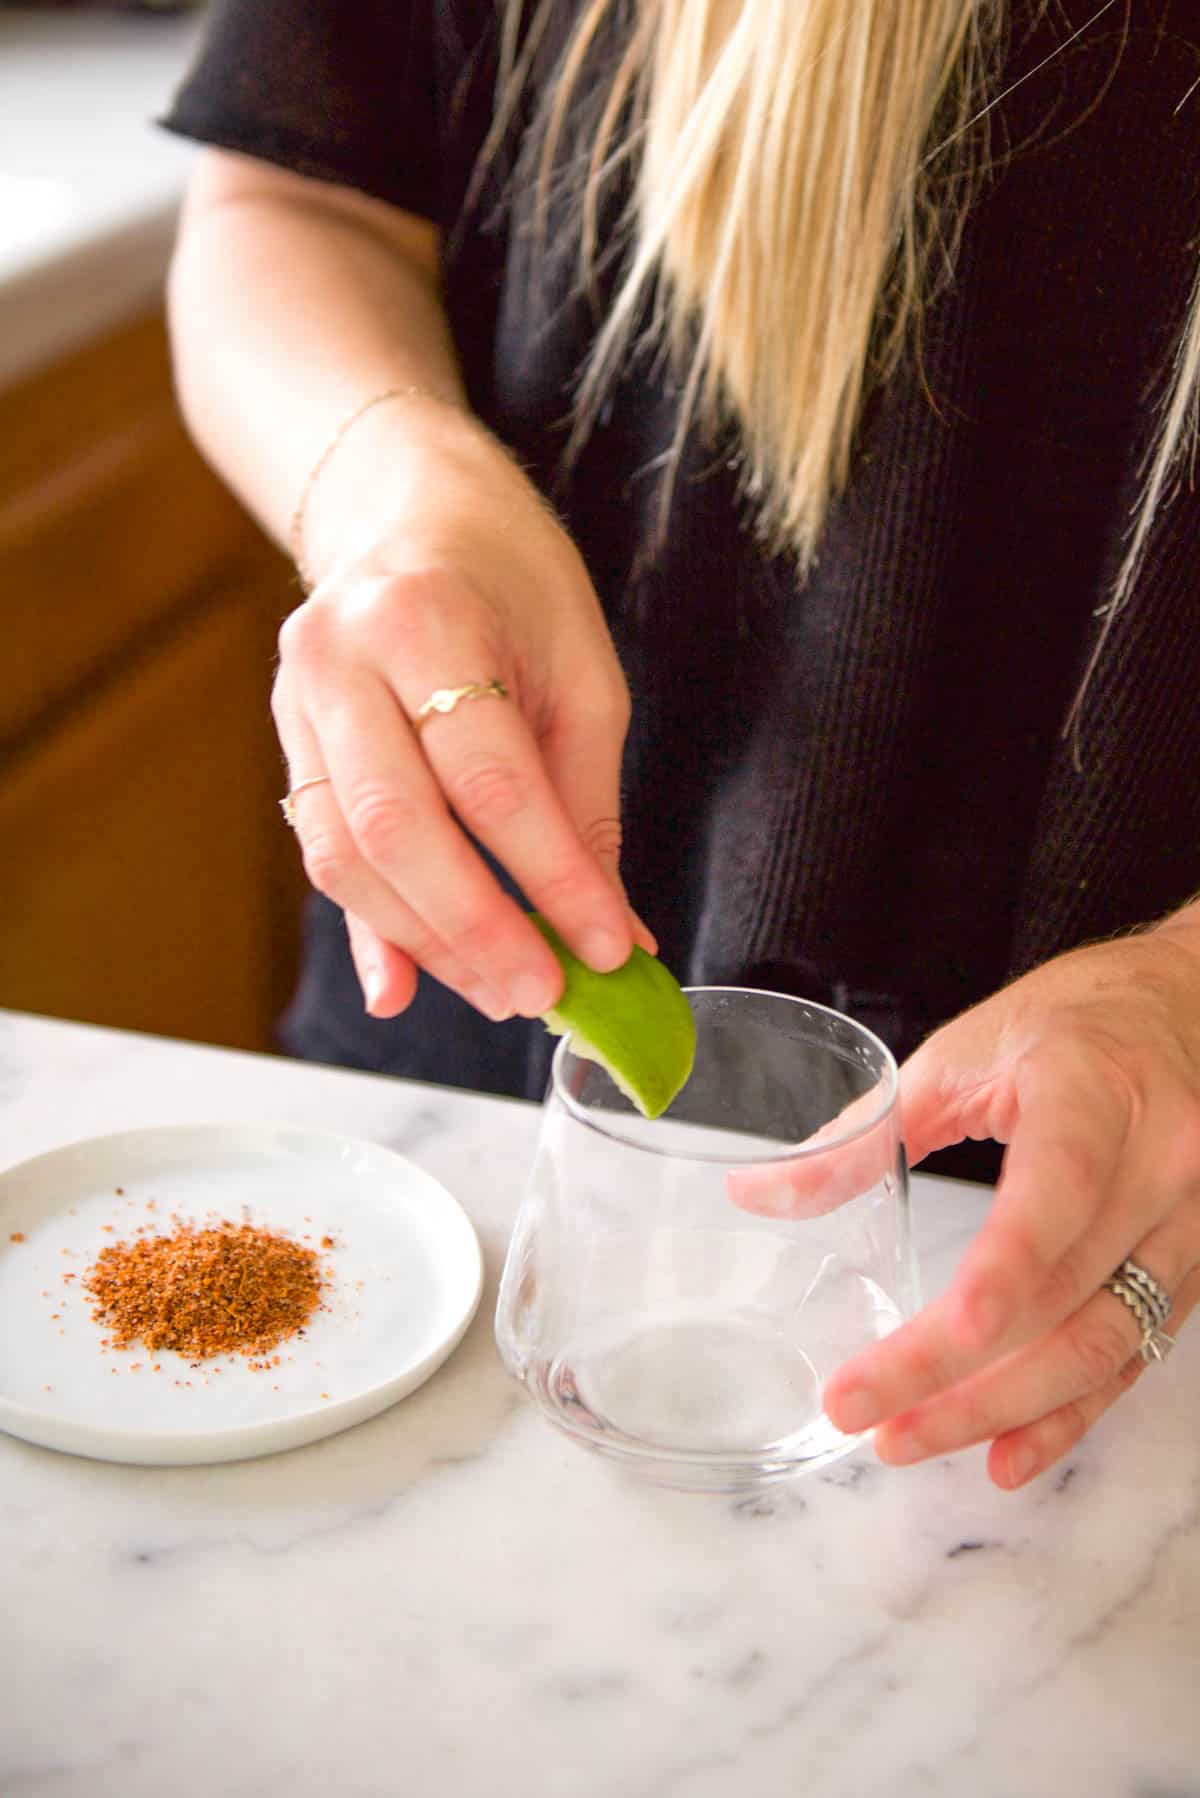 Rubbing a fresh lime on the rim of a cocktail glass for salt or tajin. How to Rim a Cocktail Glass! This post share 3 easy ways to prepare a glass for all kinds of cocktails. With sugar, salt, tajin or even chocolate sauce, this tutorial will show you how!